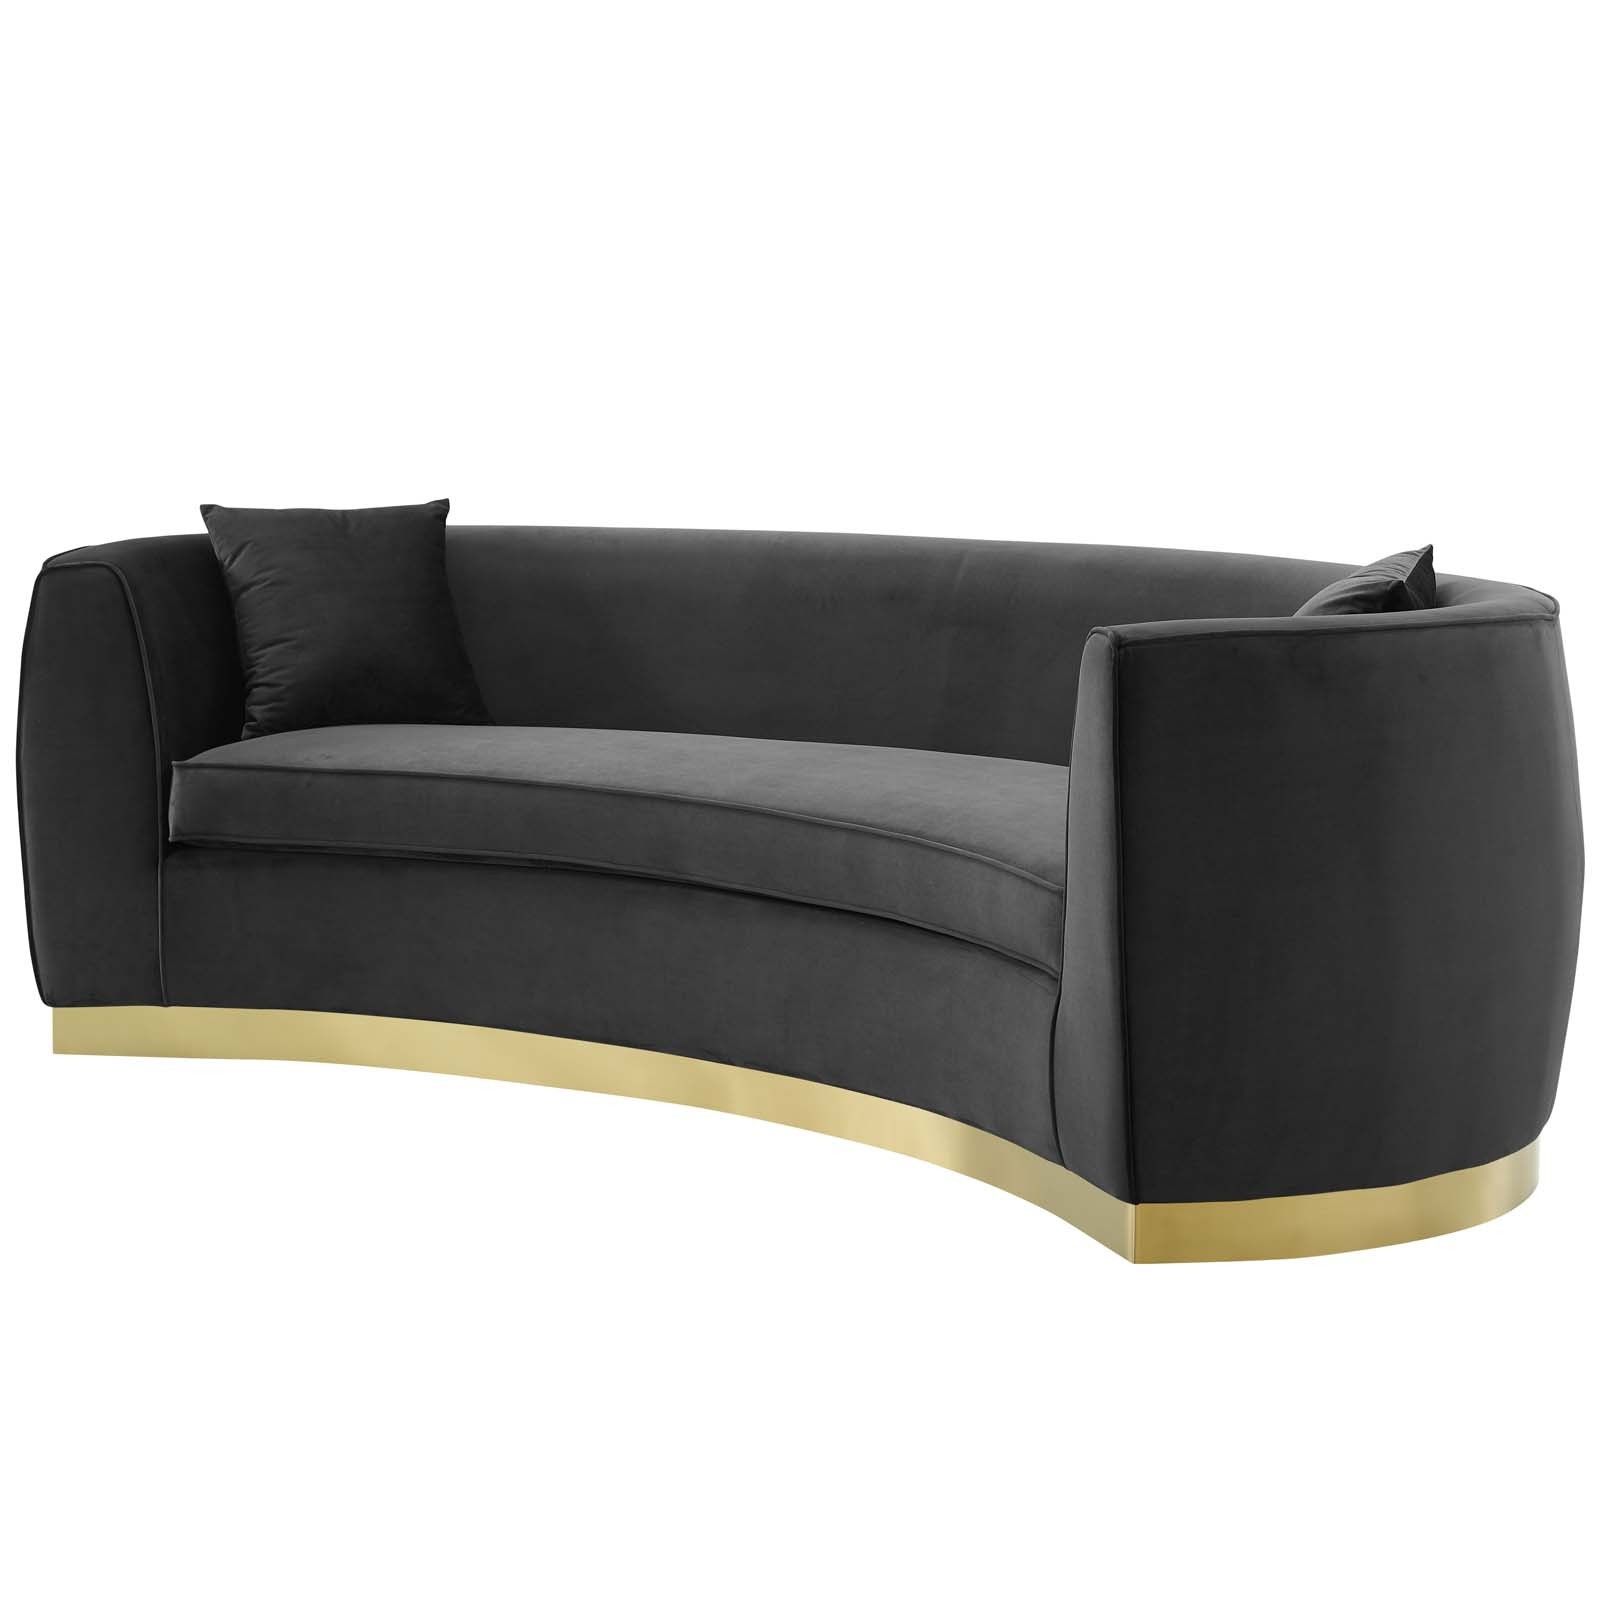 4pc French Seamed Sectional Sofas Velvet Black With Regard To Most Current Modterior :: Living Room :: Sofas/couches :: Resolute (View 17 of 25)